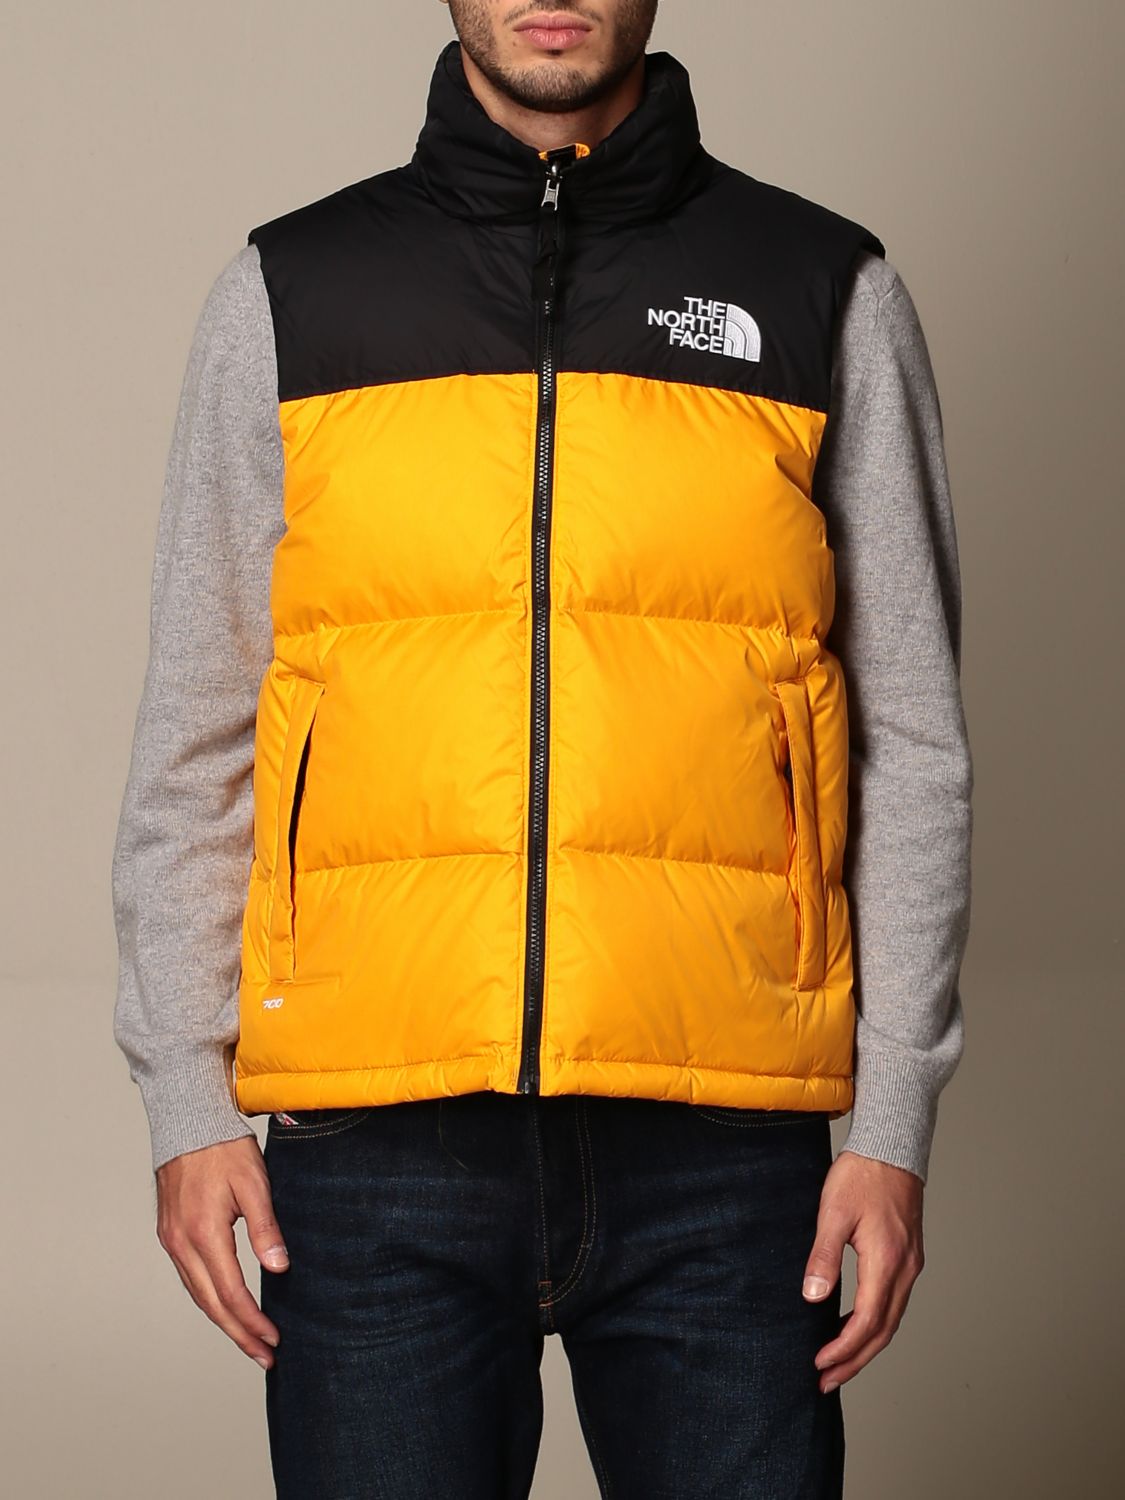 Laughter waste away A faithful THE NORTH FACE: Piumino a gilet bicolor - Giallo | Gilet The North Face  NF0A3JQQ GIGLIO.COM